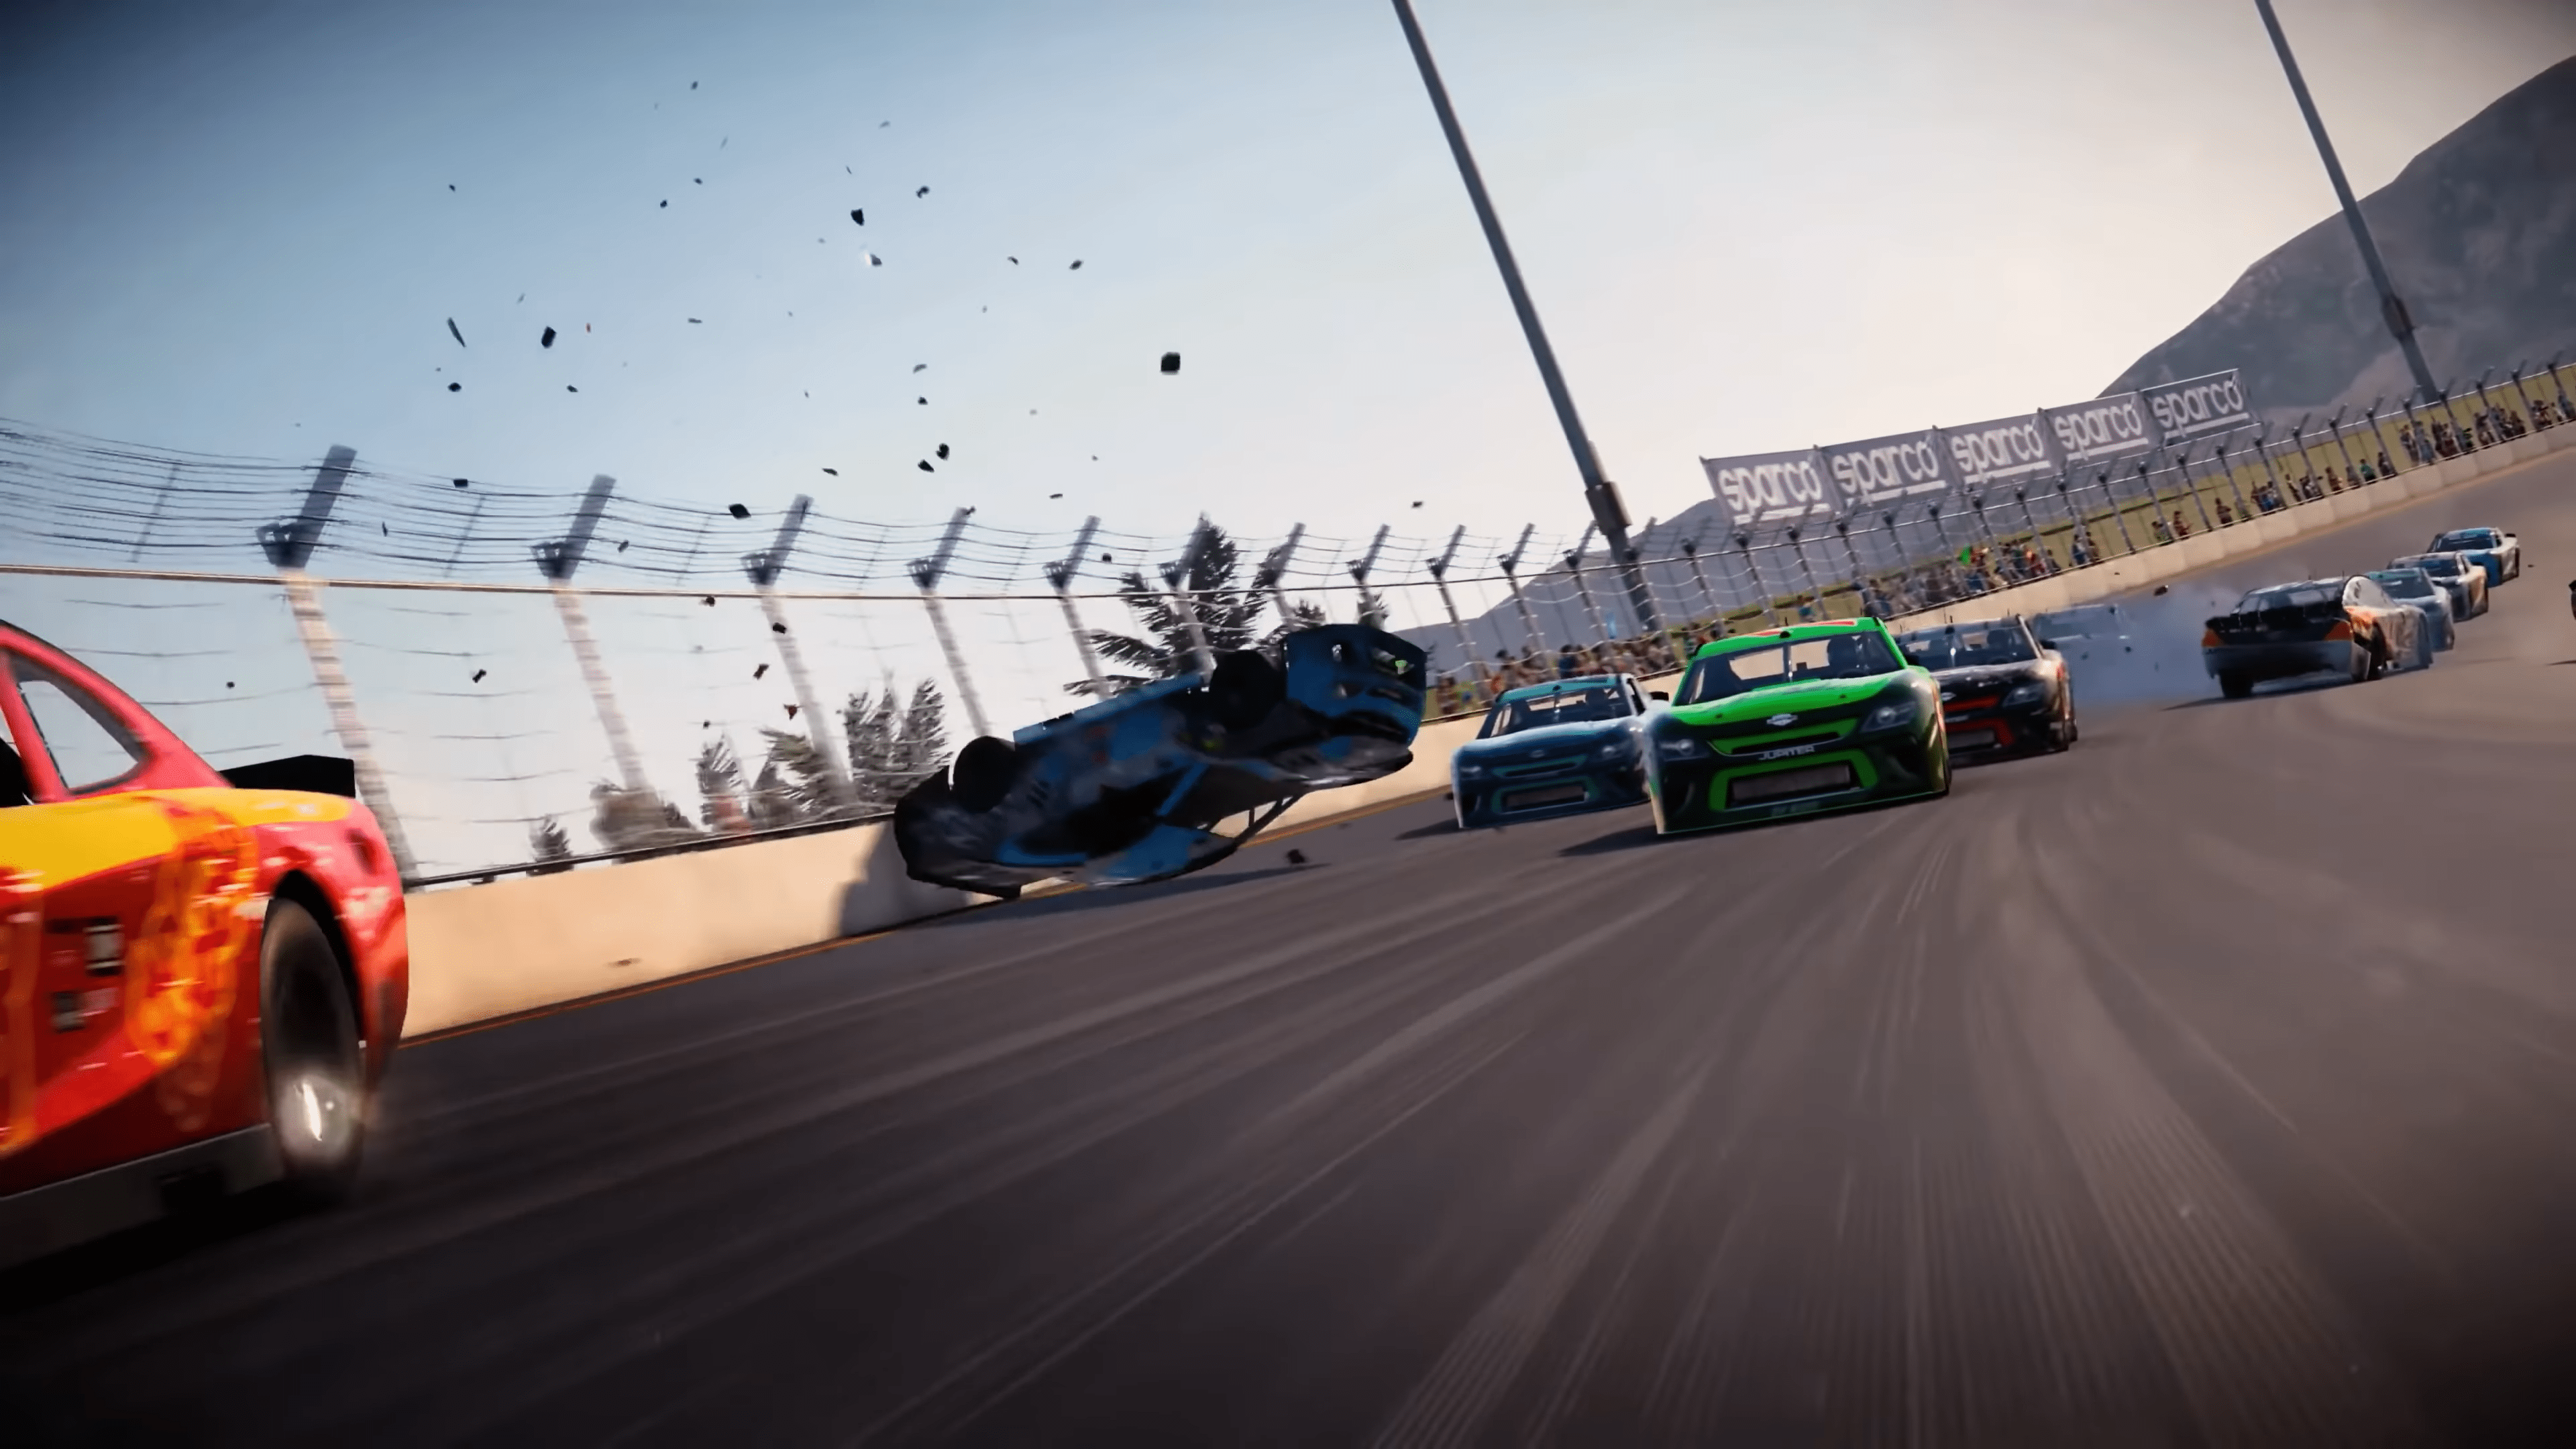 Codemasters Racing Game Grid Is Free To Play For This Weekend On Steam Platform